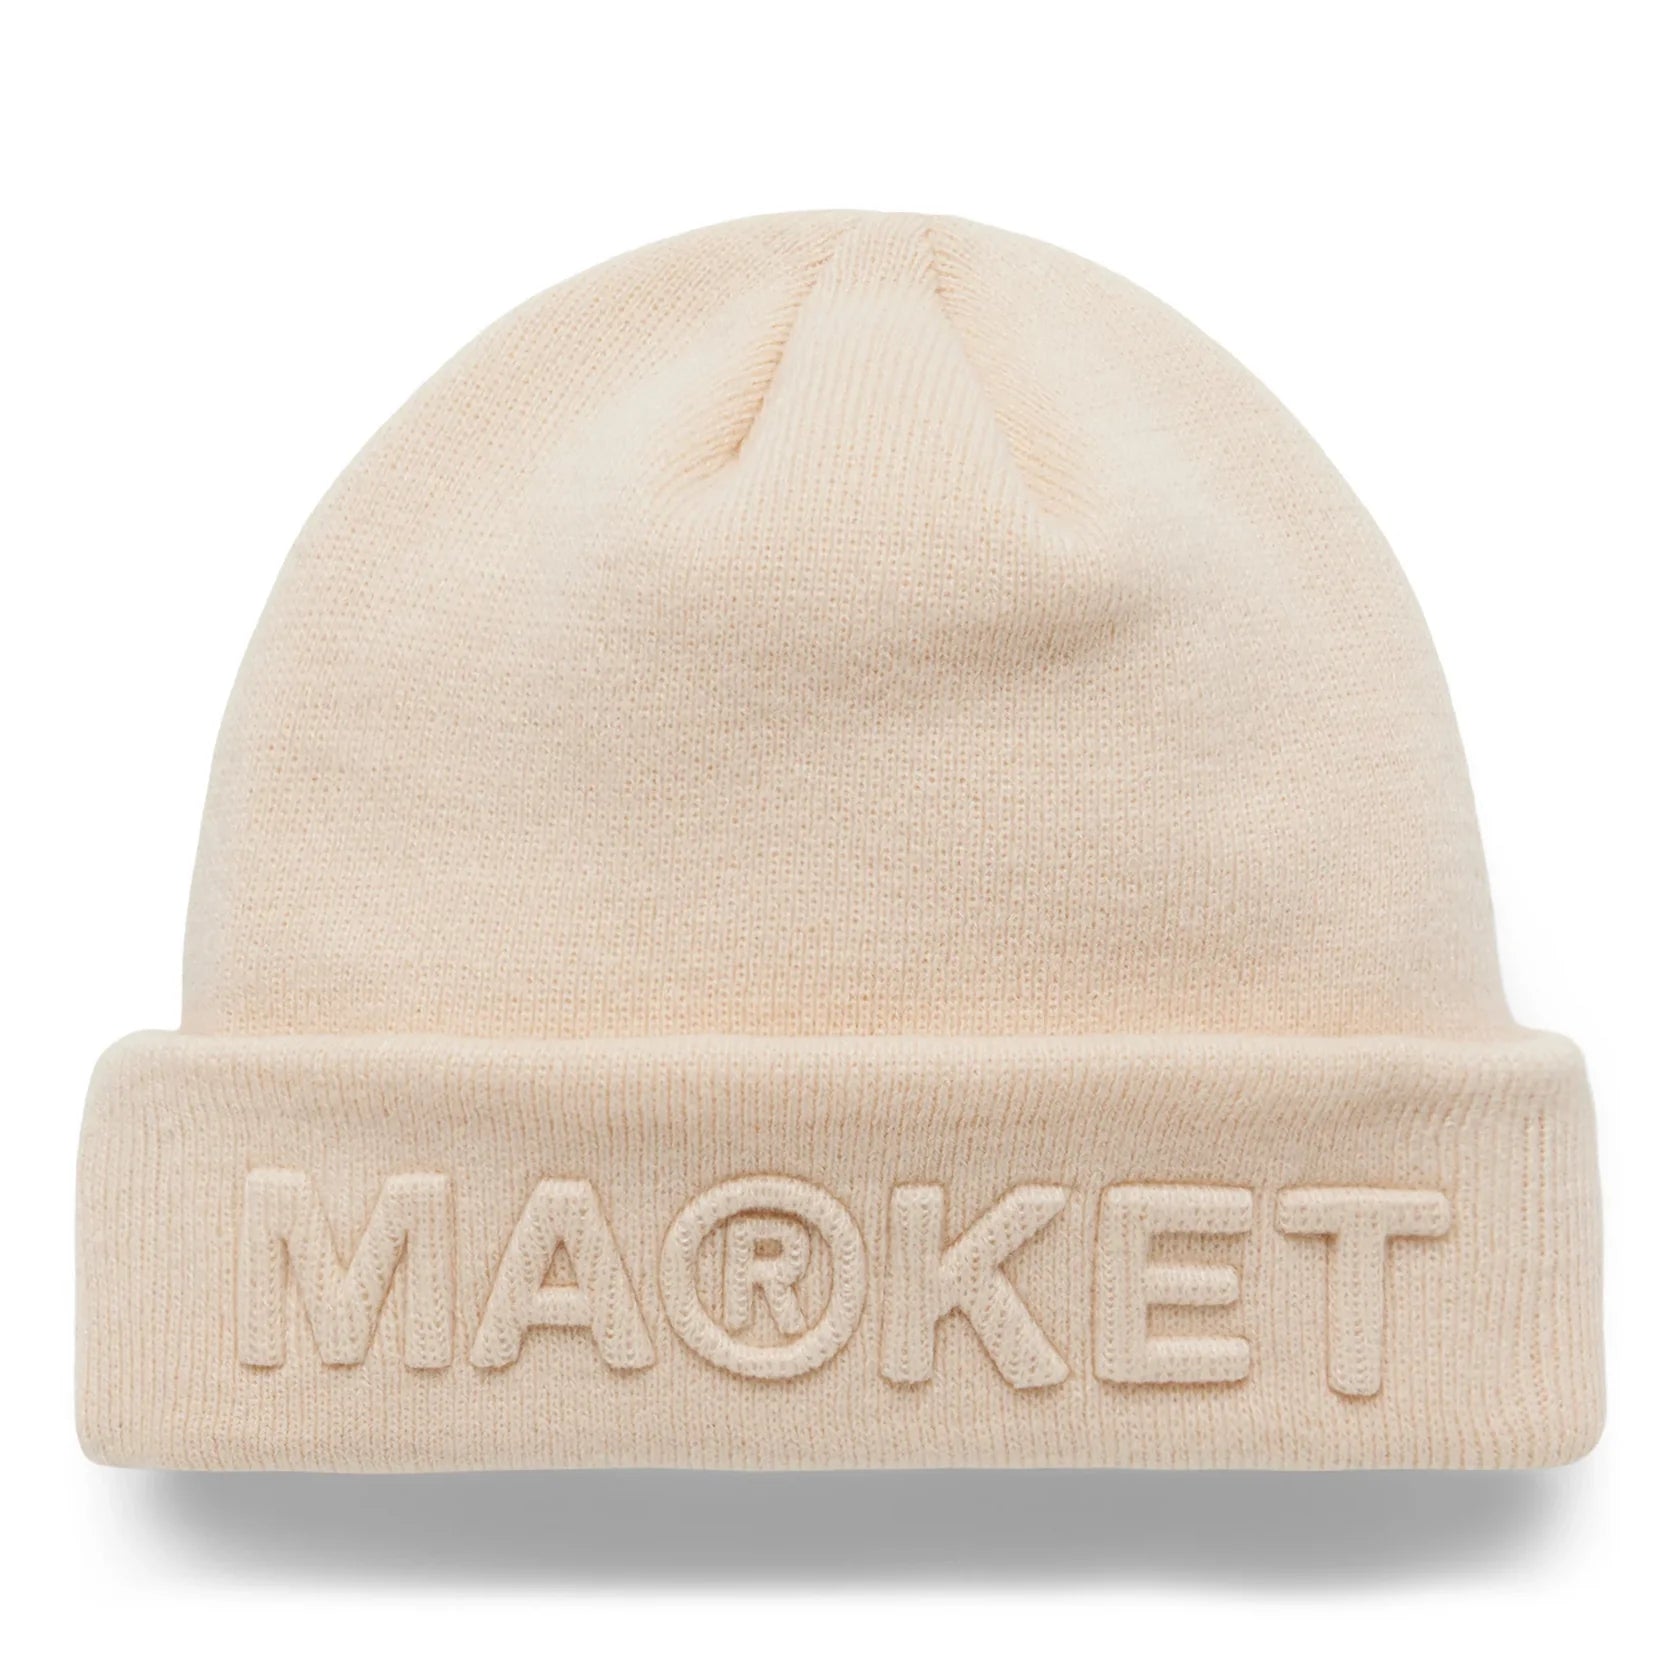 MARKET clothing brand MARKET KNIT BEANIE. Find more graphic tees, hats, beanies, hoodies at MarketStudios.com. Formally Chinatown Market. 